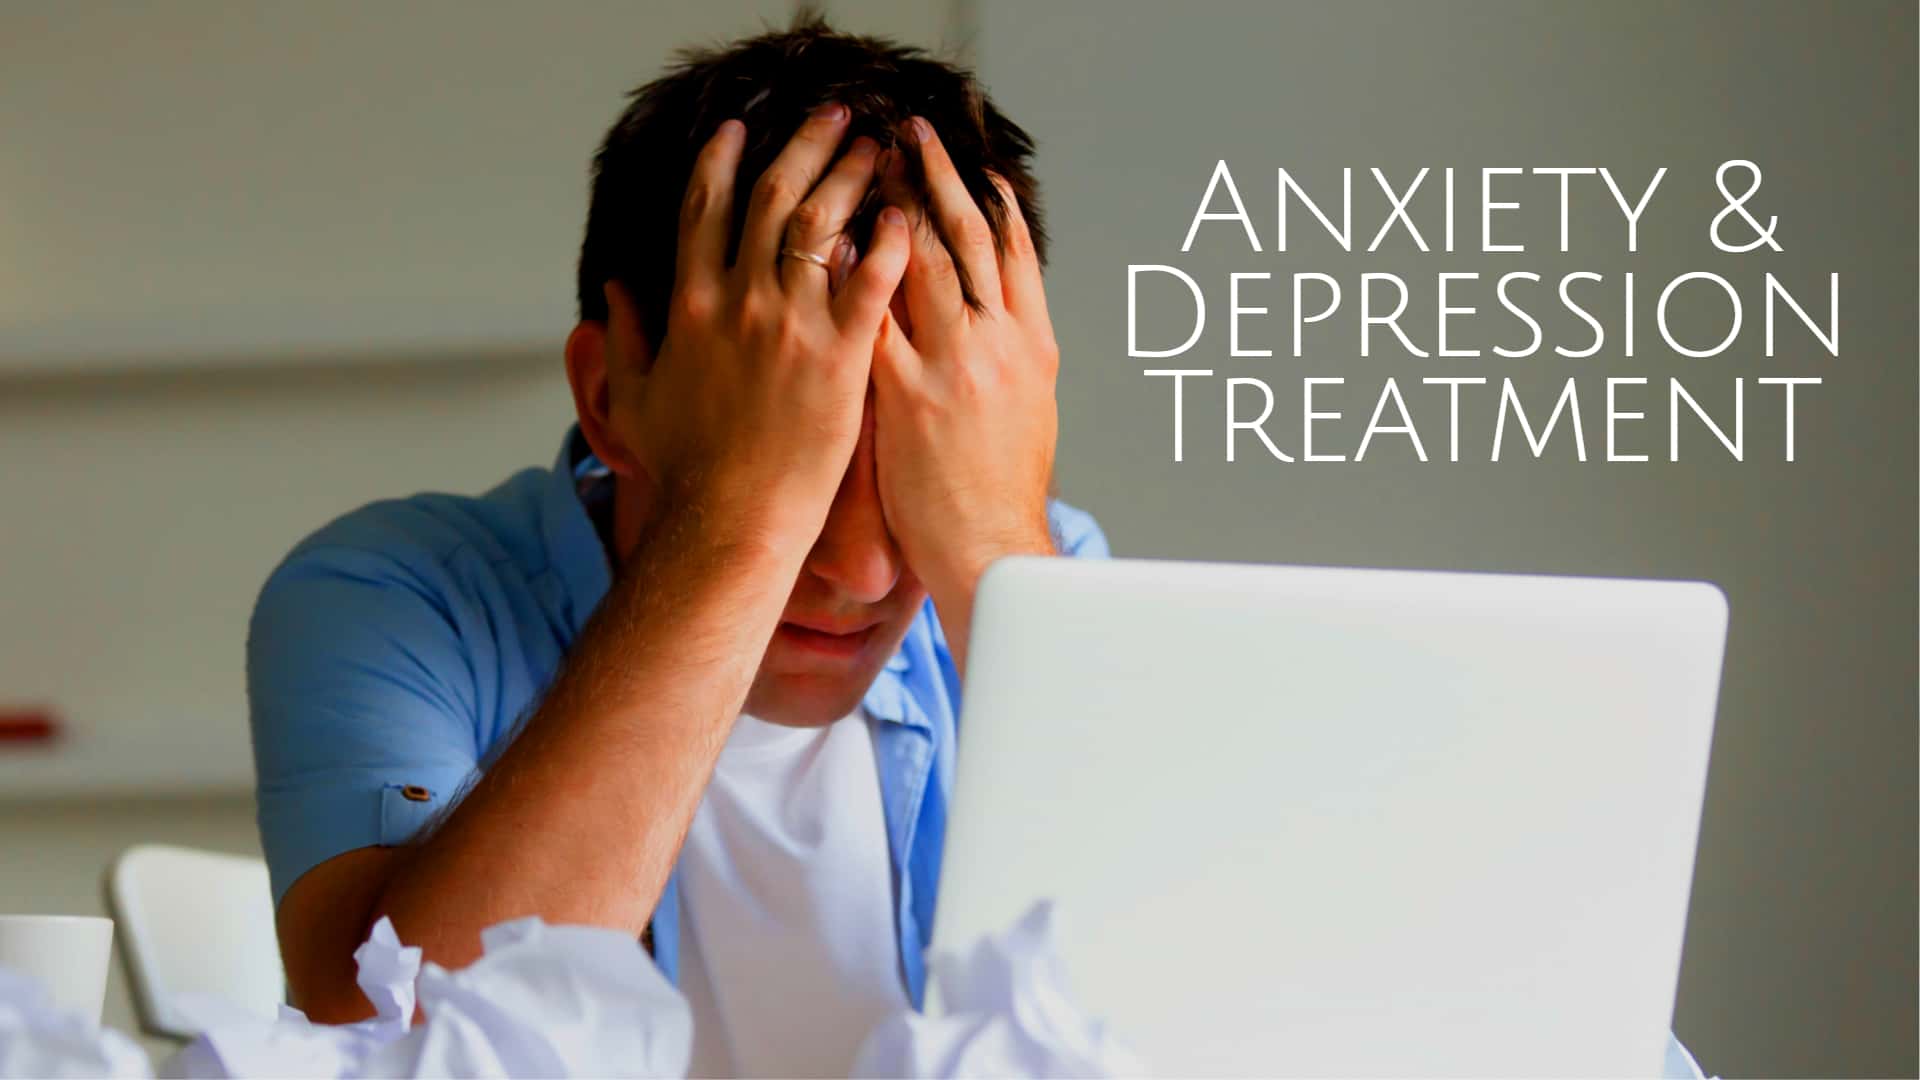 anxiety depression treatment in nagpur,anxiety treatment in nagpur,depression treatment in nagpur